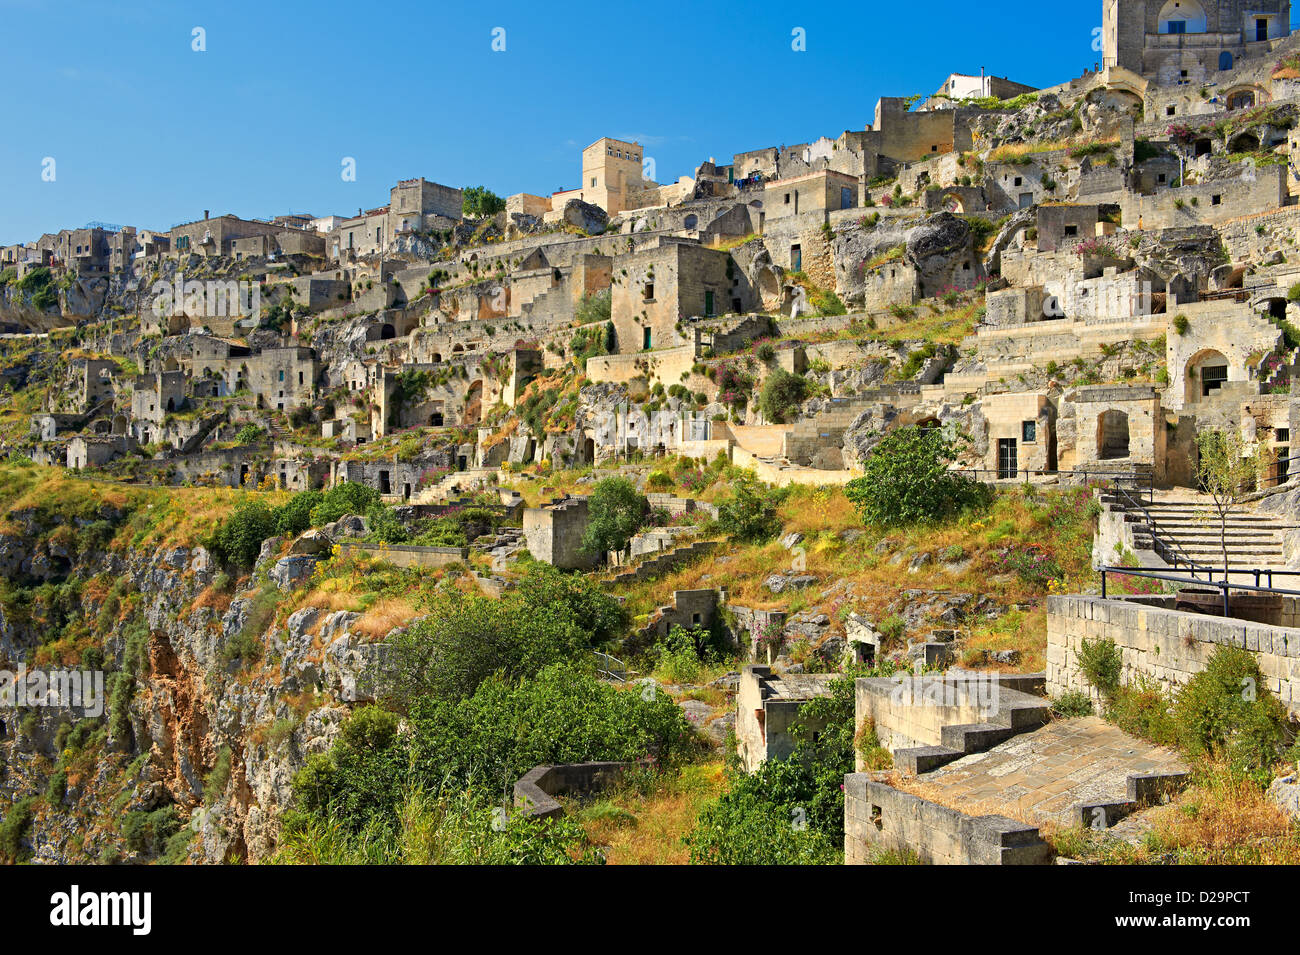 The ancient cave dwellings, known as “ Sassi “ , in Matera, Southern Italy. A UNESCO World Heritage Site.  Stock Photo